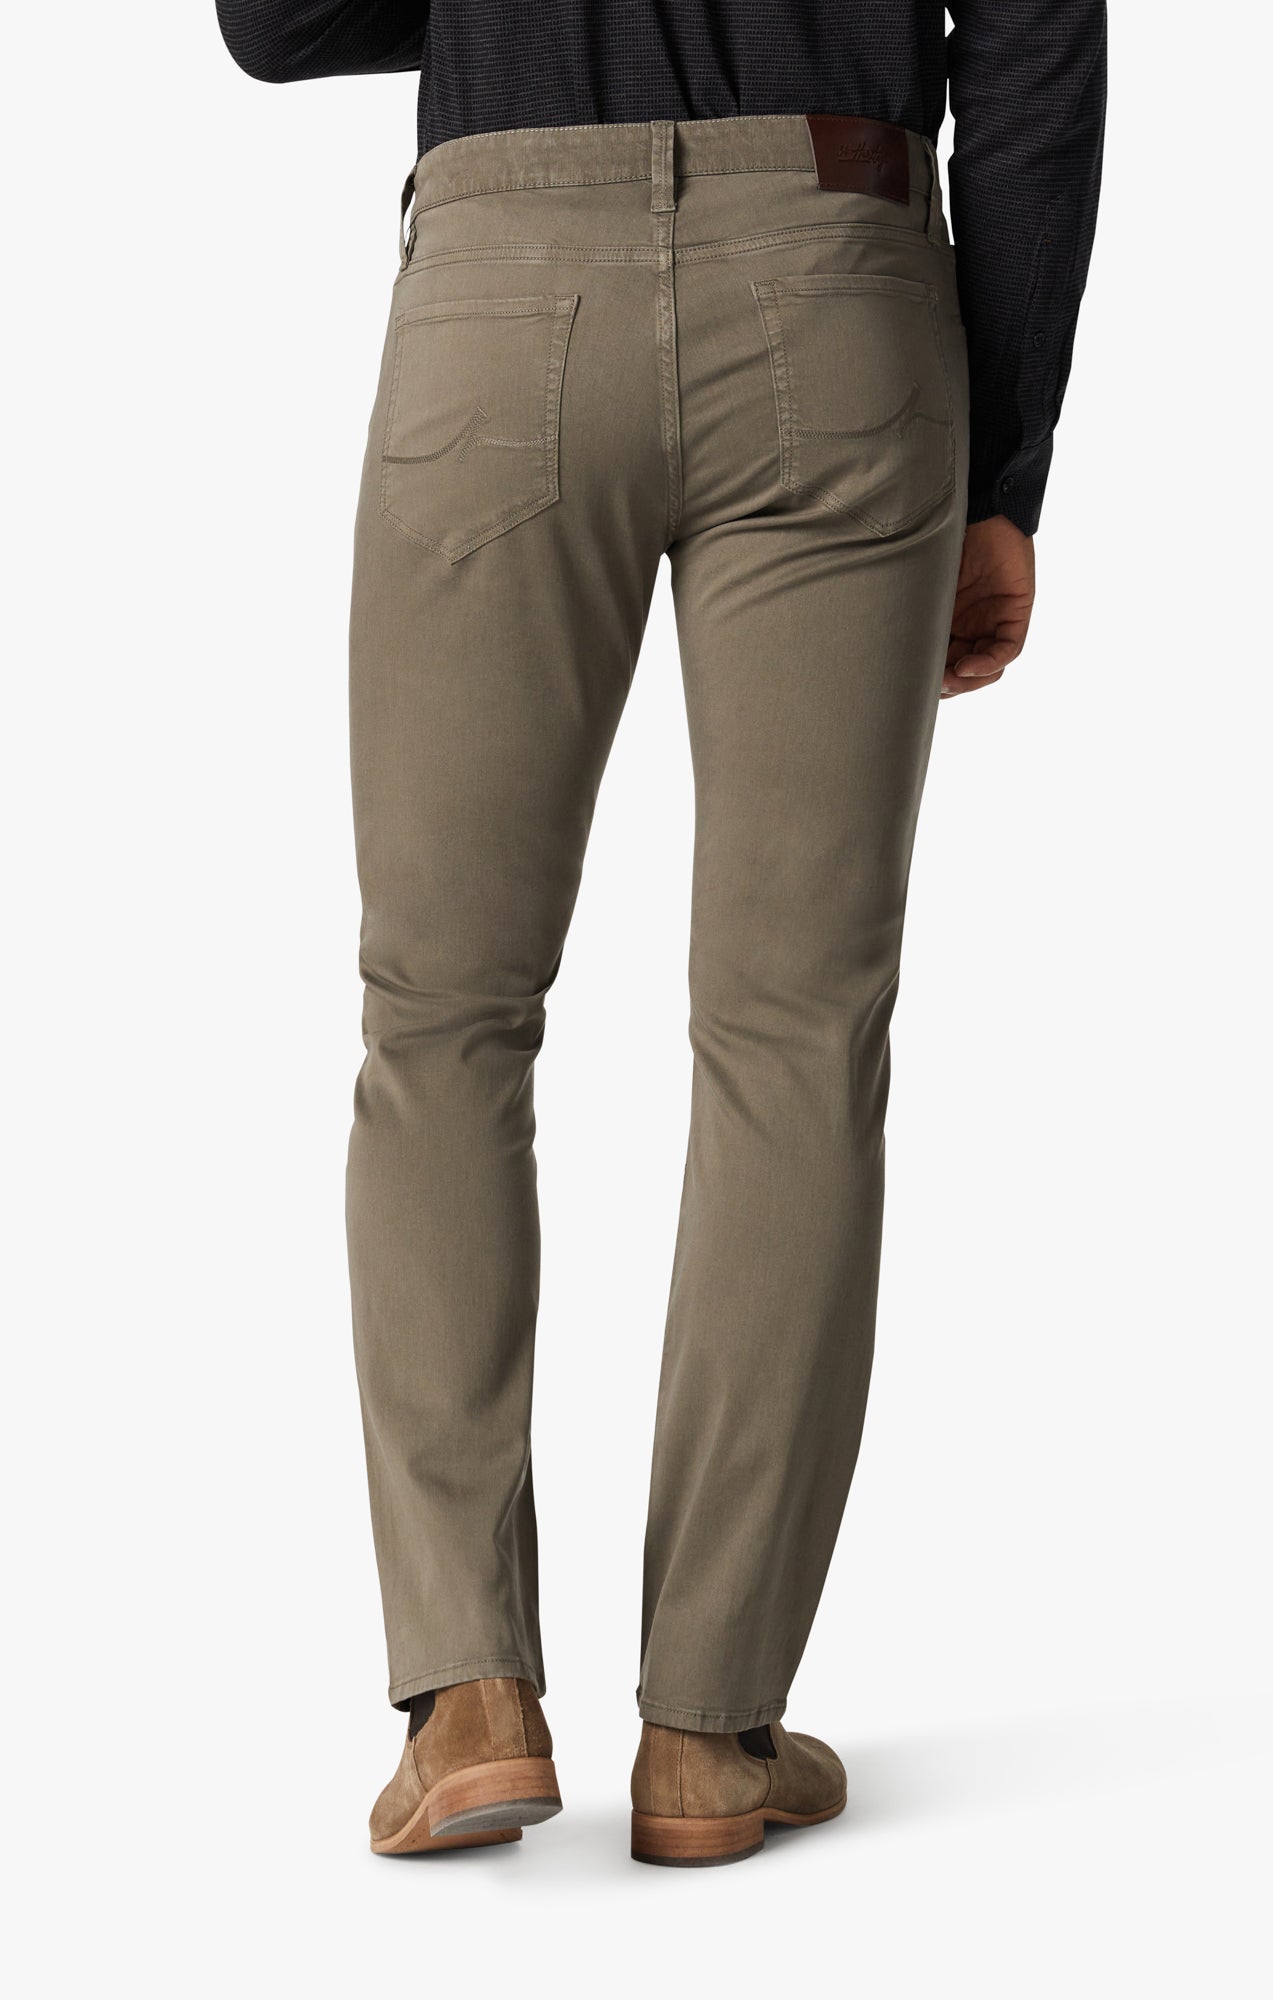 Courage Straight Leg Pants in Canteen Twill Image 4